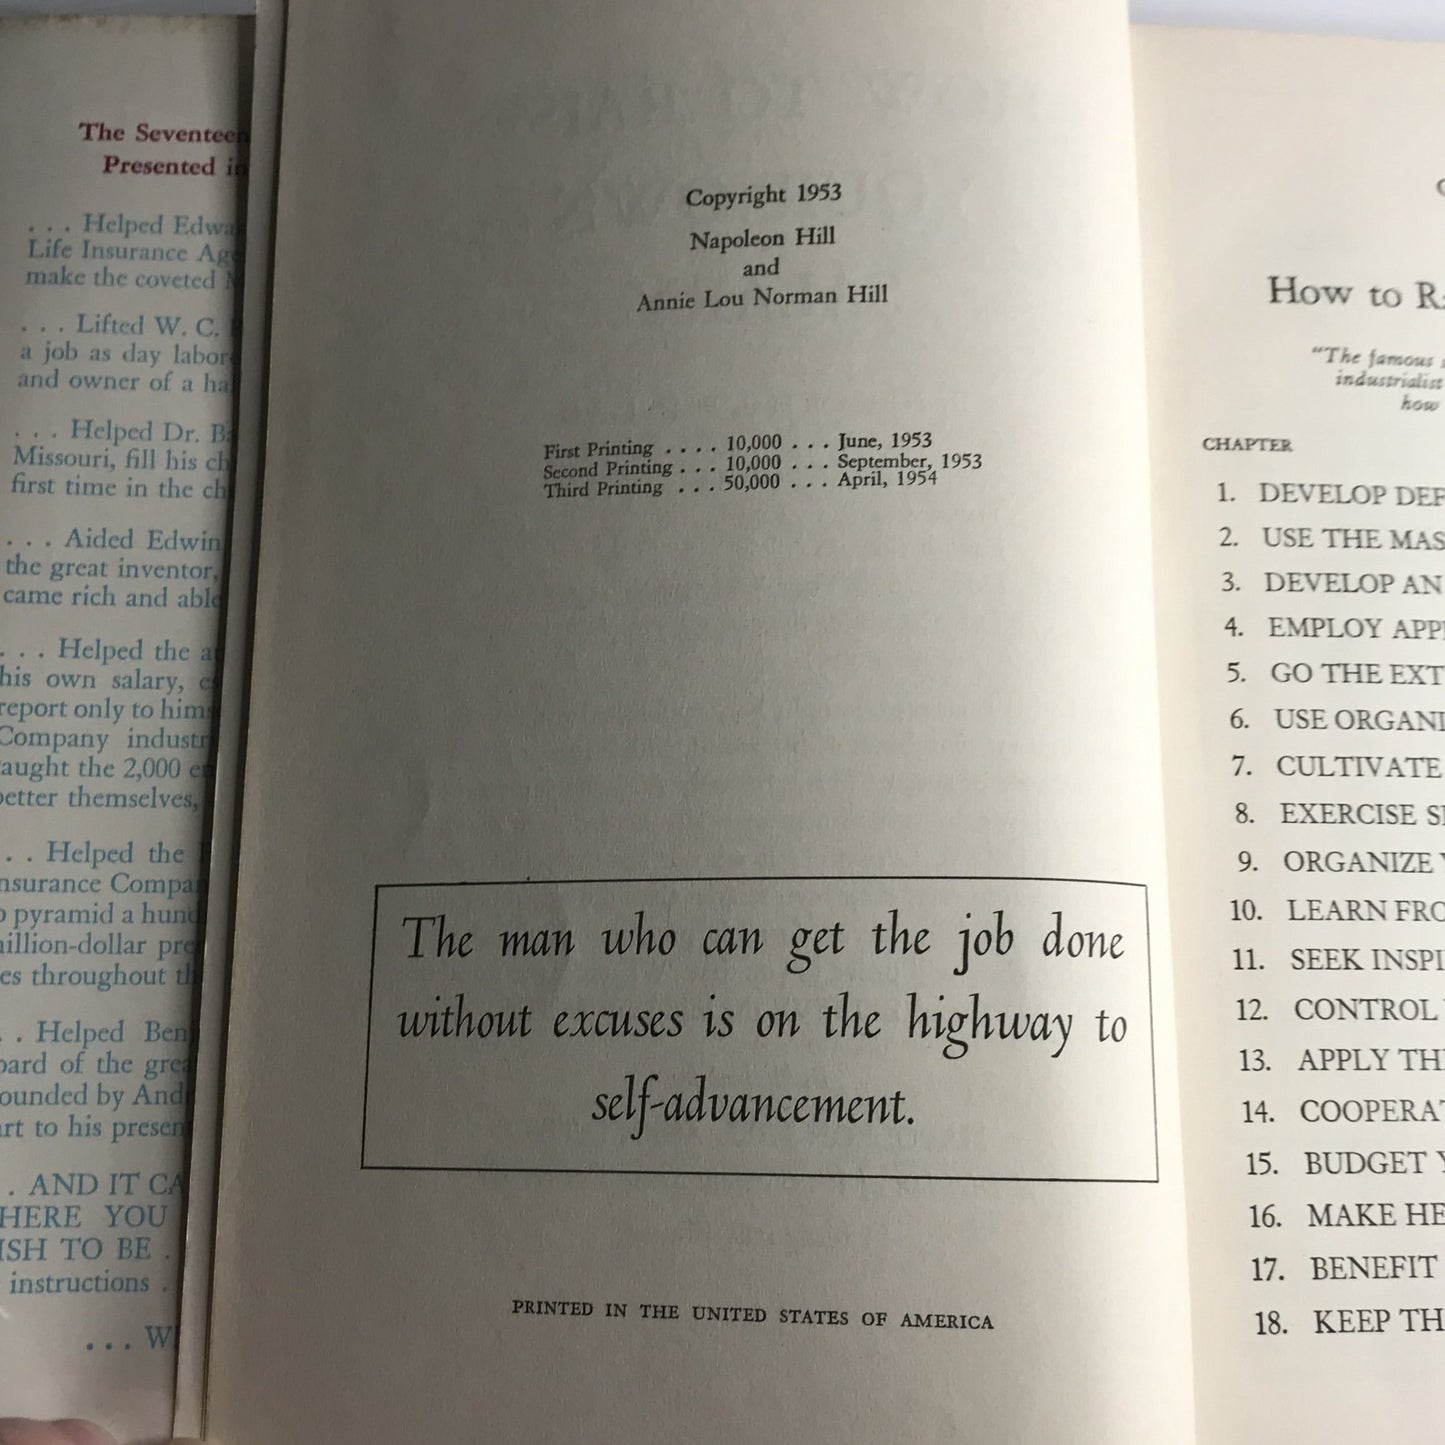 How to Raise Your Own Salary - Napoleon Hill - Signed - 3rd Printing